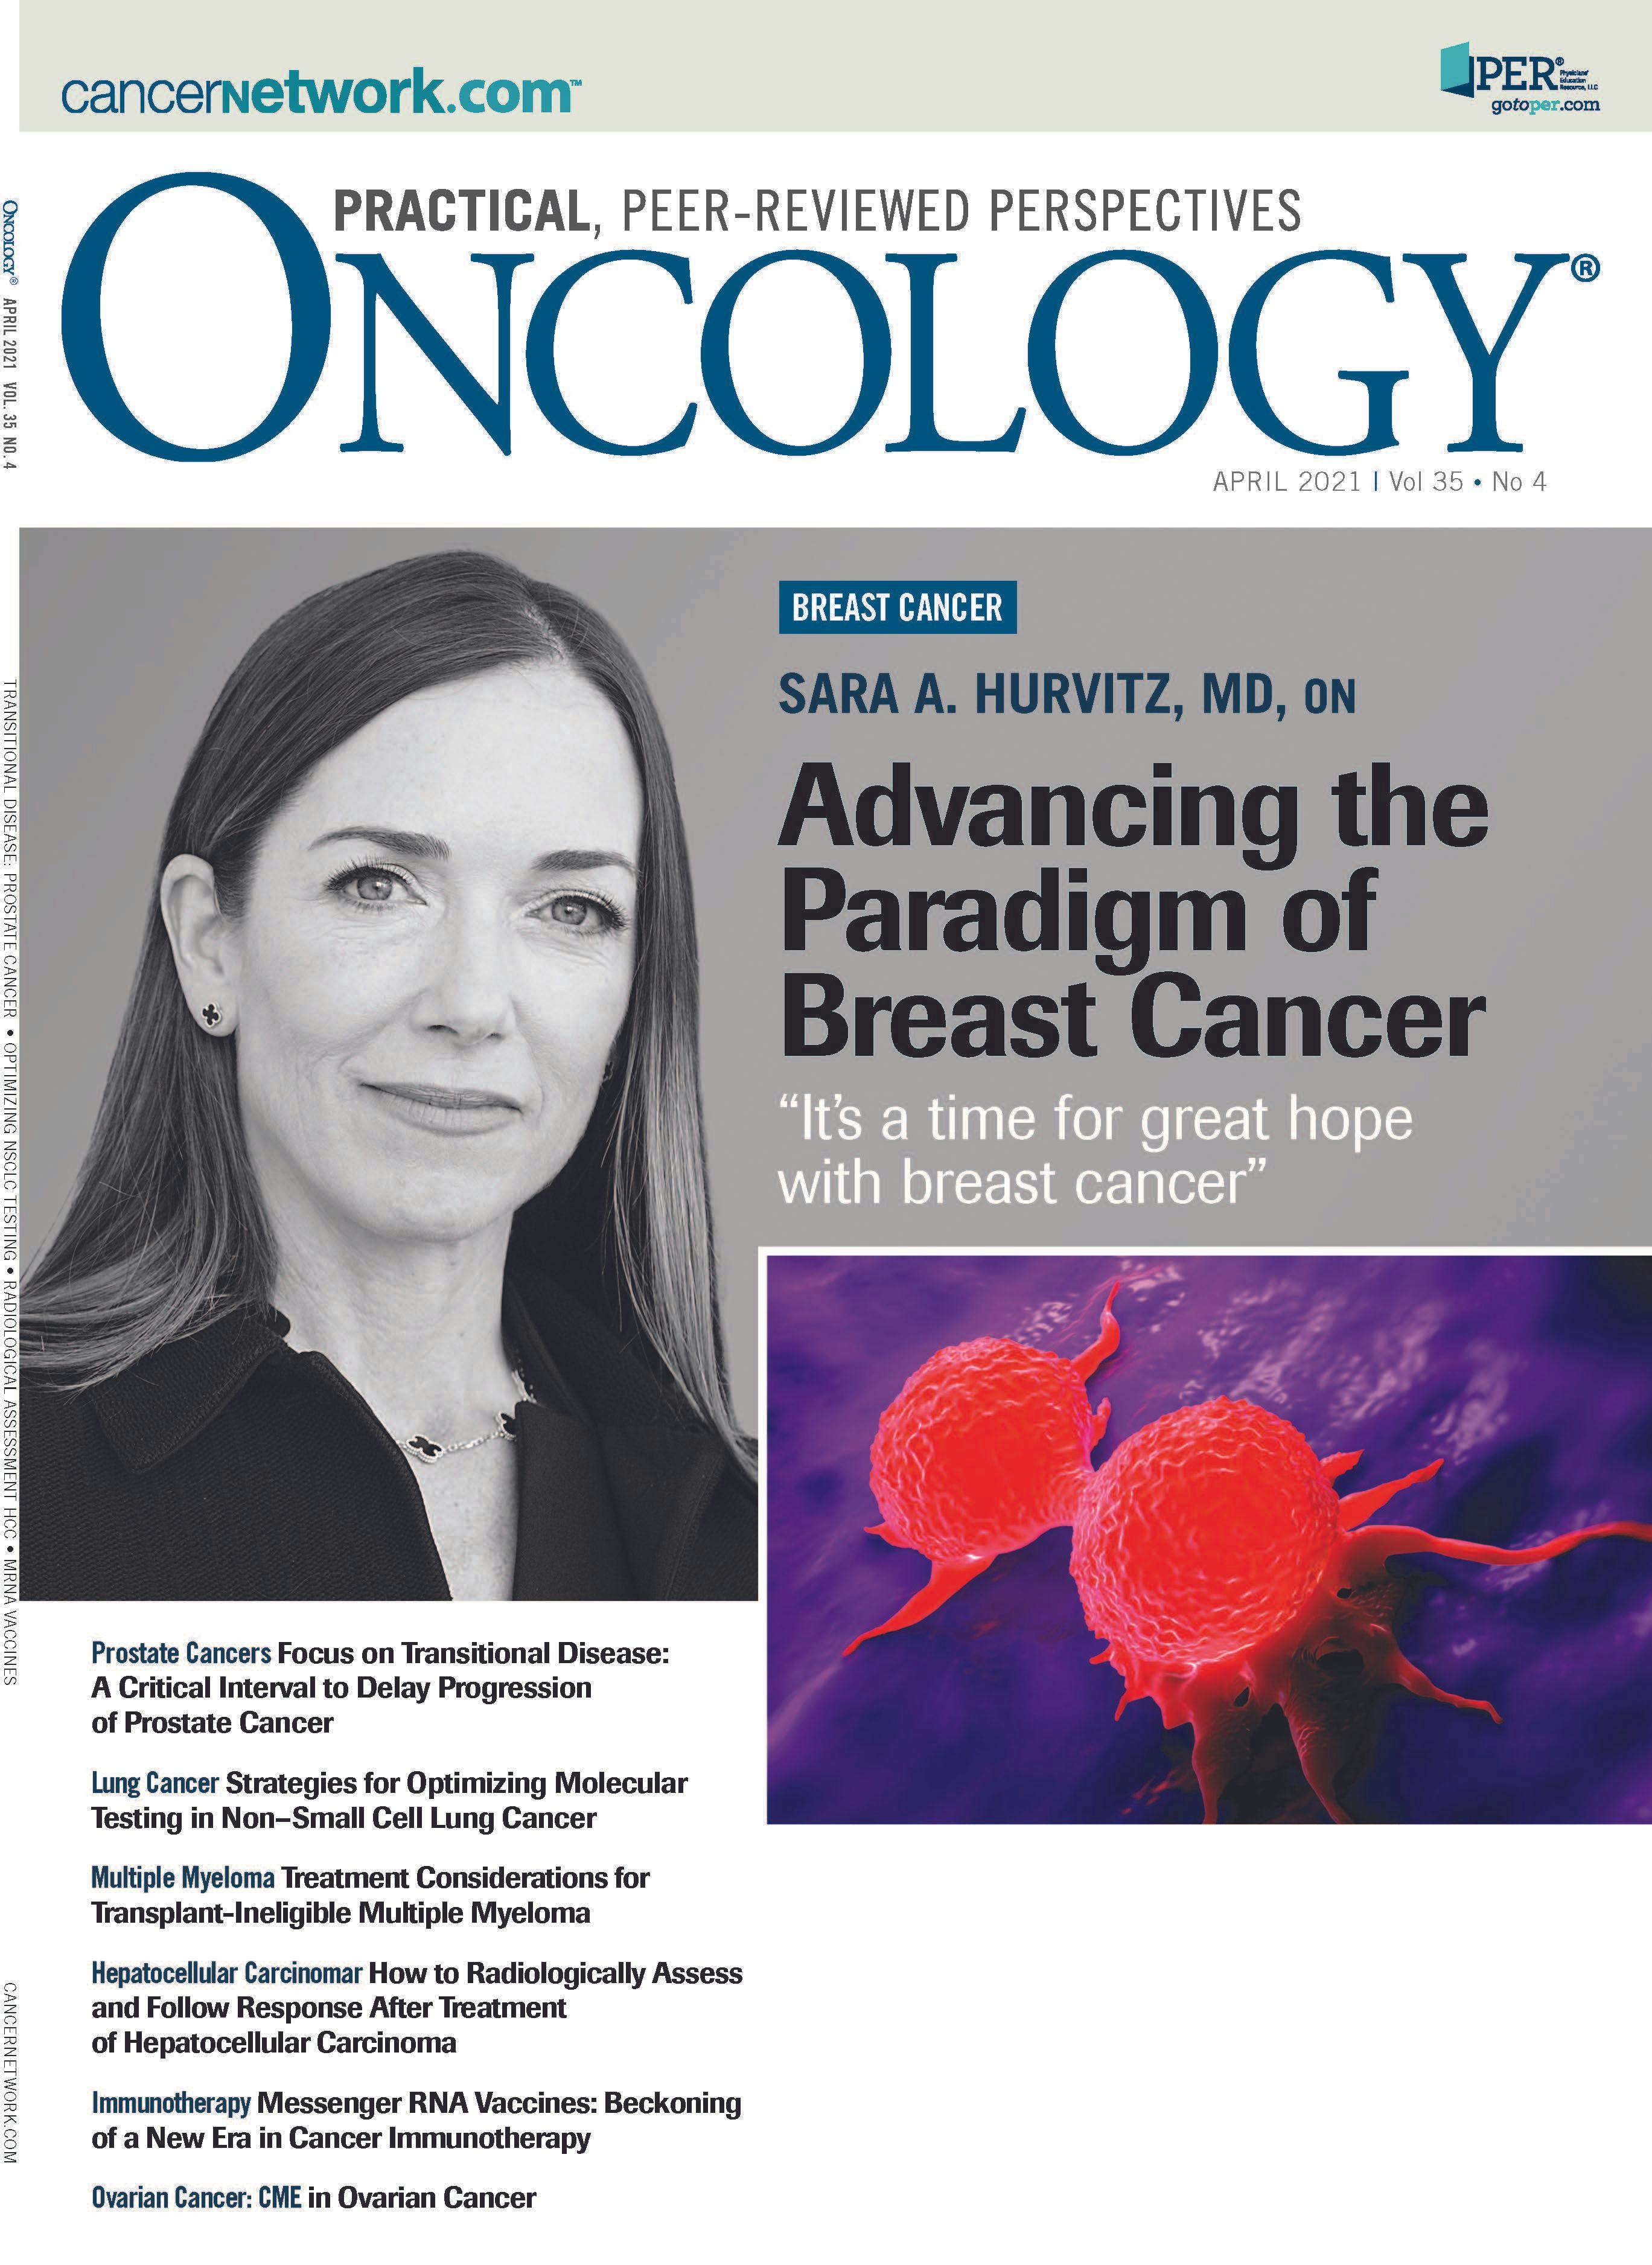 ONCOLOGY Vol 35, Issue 4